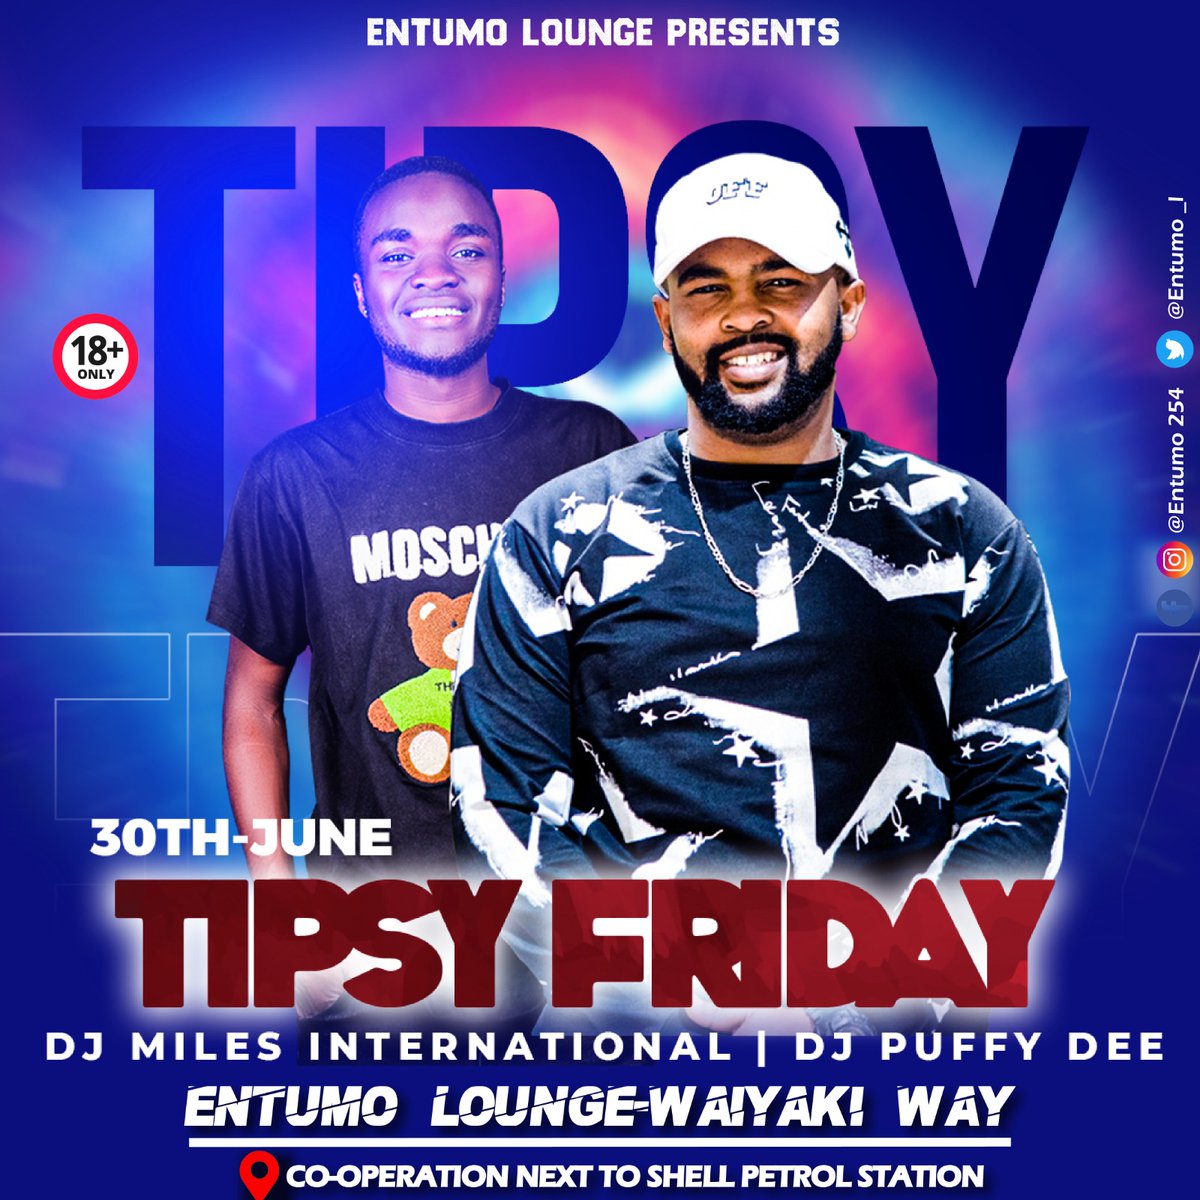 🎤Just got paid🎸it's Furahiday night🎵 ⚡️Is the weekend ready for you because we are💃 ⚡️Welcome to the weekend, this is where it all happens🔥 Entumo Lounge ⏩️ Another Place.....Another World⏪️ #entumo254 #entumolounge #waiyakiwaysfinest #tipsyfridaynights